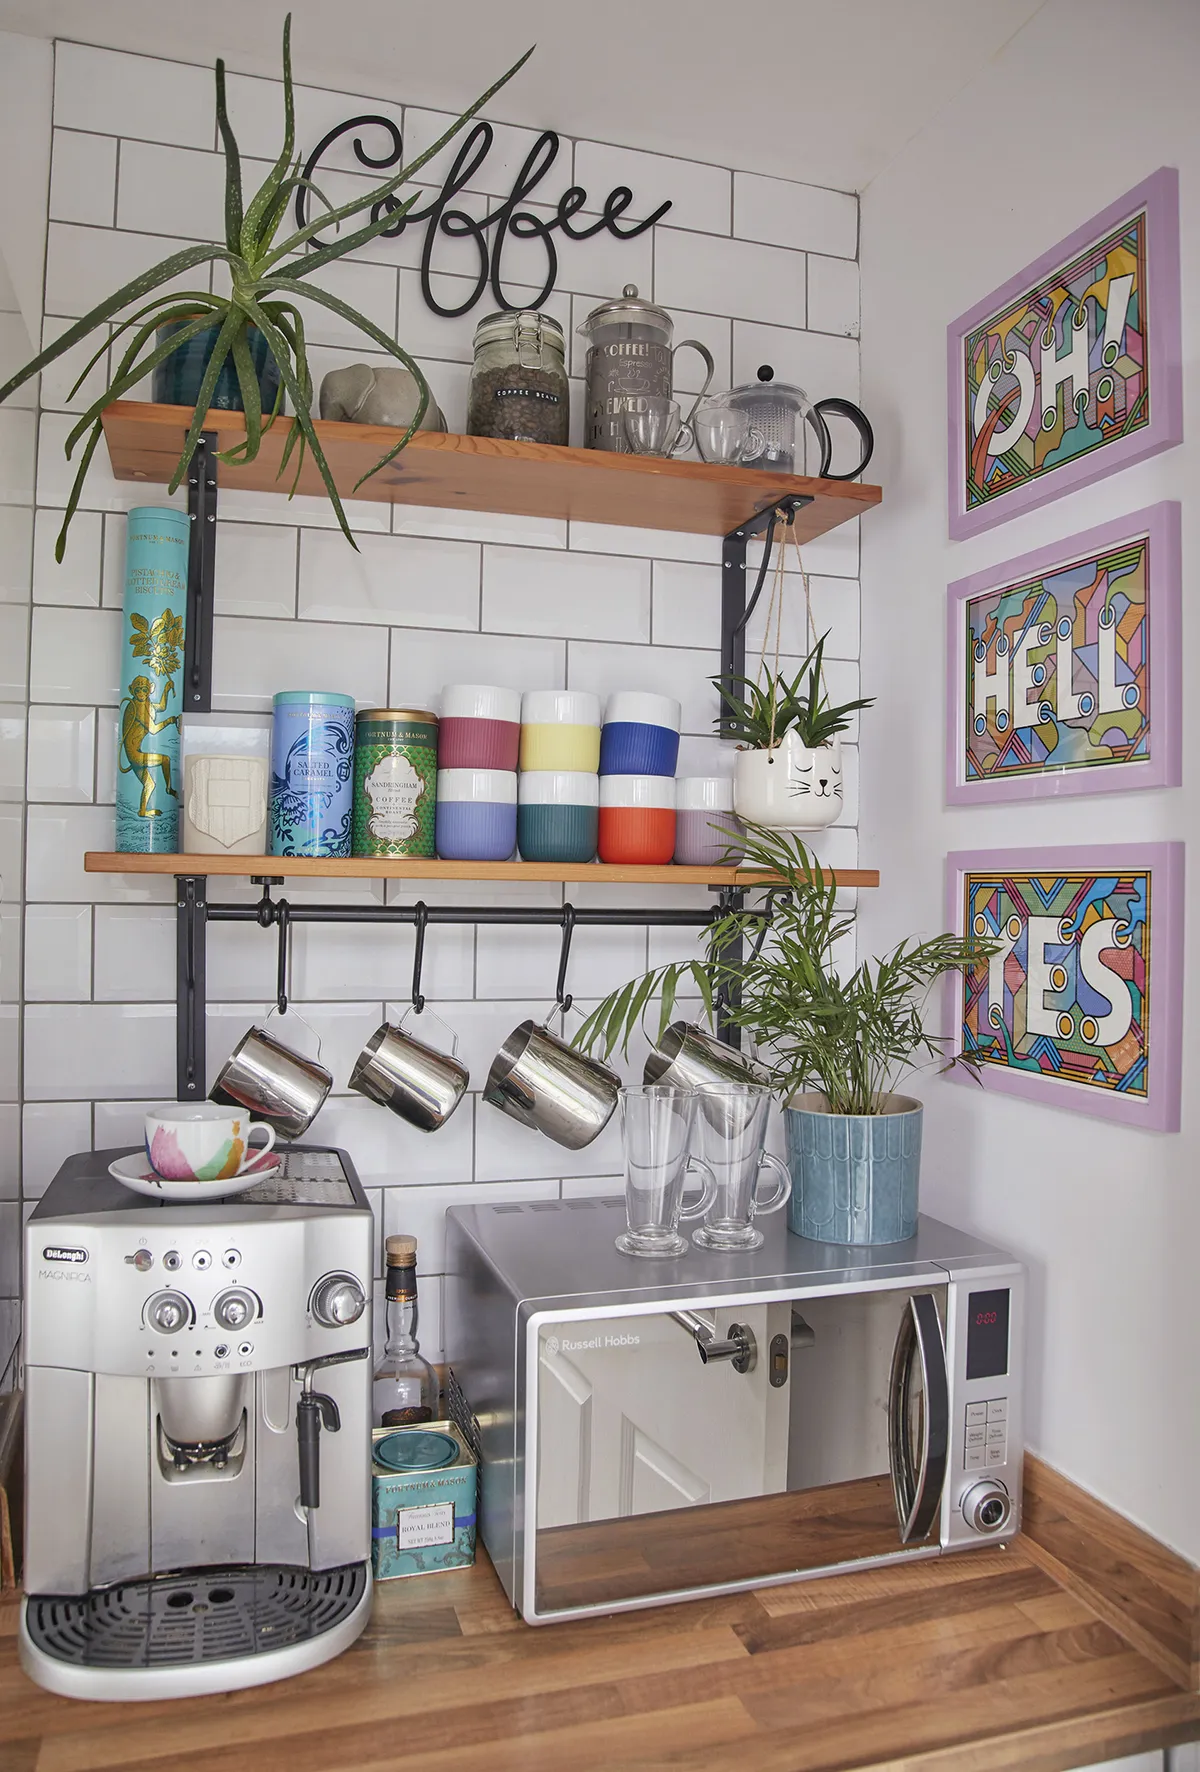 ‘We call this our ‘Caffeine Station’. This was meant to be a utility room, but we both love coffee so we decided to make it into an area that would brighten our mornings. The ‘Oh Hell Yes’ prints are by the illustrator Rob Lowe’